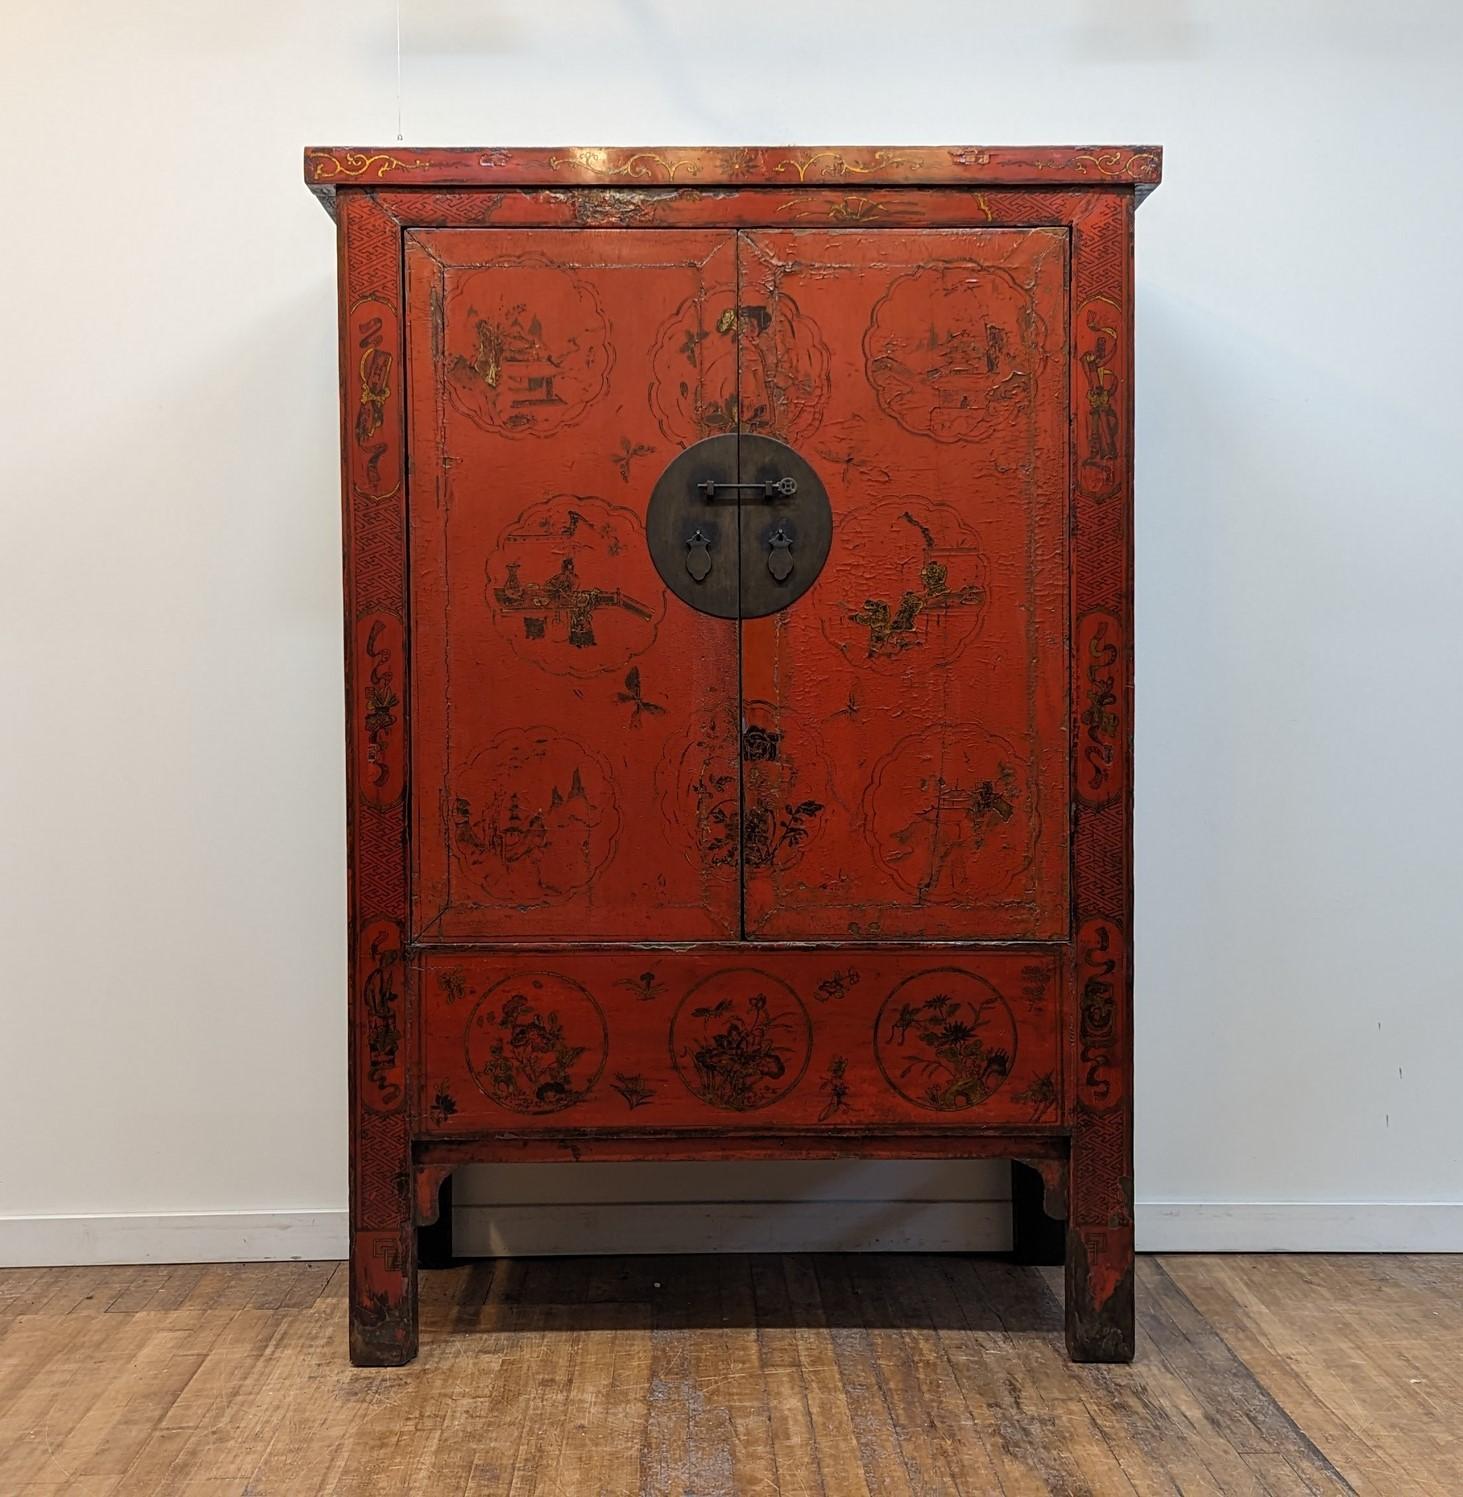 19th Century Chinese Red Lacquered Cabinet.  A beautiful 19th Century Red Lacquer Gilt Painted Qing Dynasty Cabinet.  Early 1800's a wonderful piece from Shanxi Province.  The warm worn cinnabar red lacquer has a spectacular patina of 180 plus